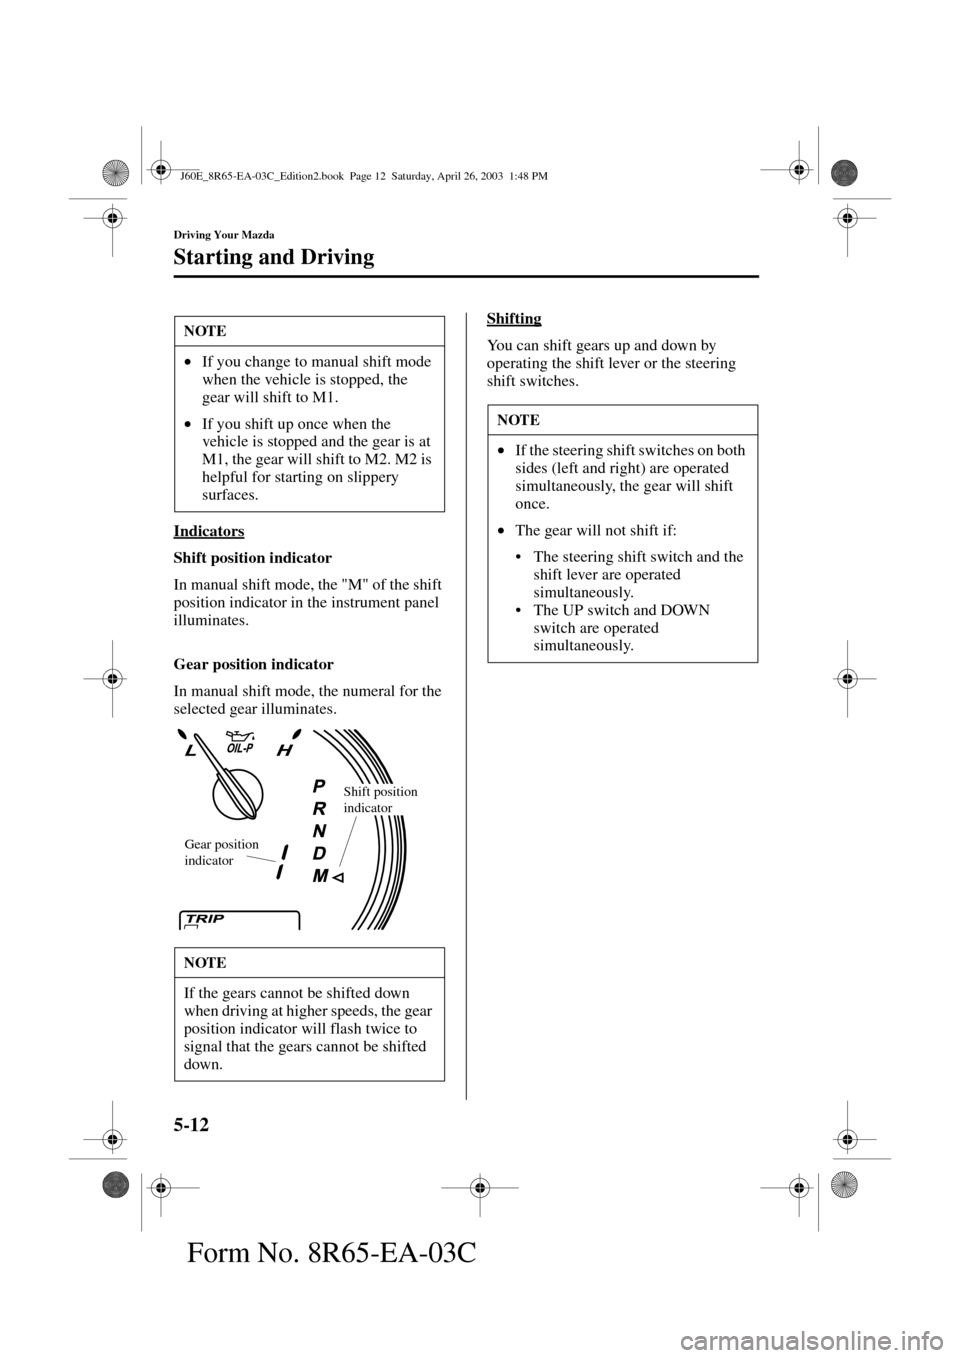 MAZDA MODEL RX 8 2004  Owners Manual (in English) 5-12
Driving Your Mazda
Starting and Driving
Form No. 8R65-EA-03C
Indicators
Shift position indicator
In manual shift mode, the "M" of the shift 
position indicator in the instrument panel 
illuminate